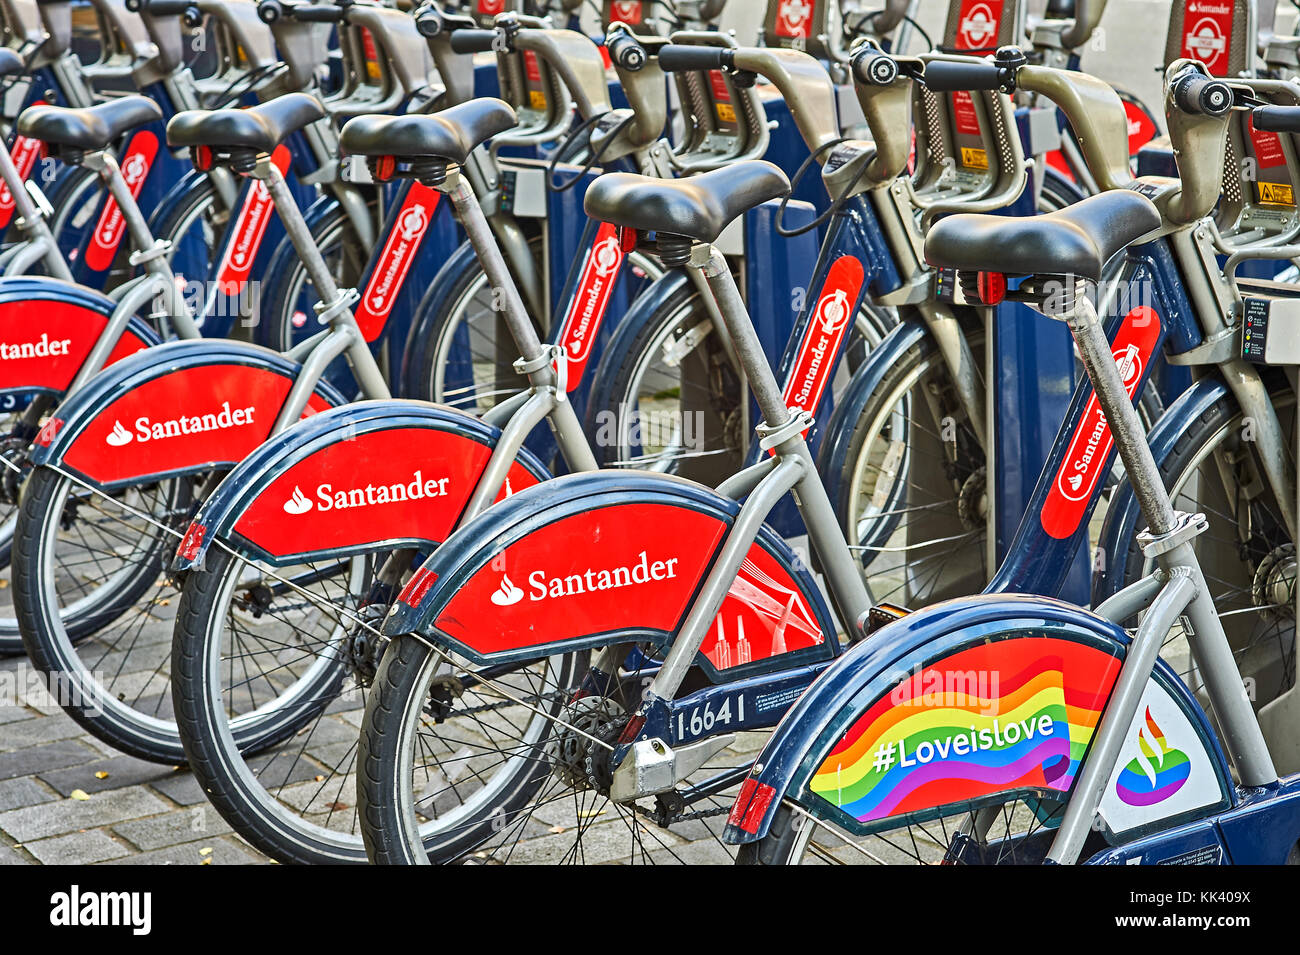 Santander bicycles for hire at a docking station in central London Stock Photo